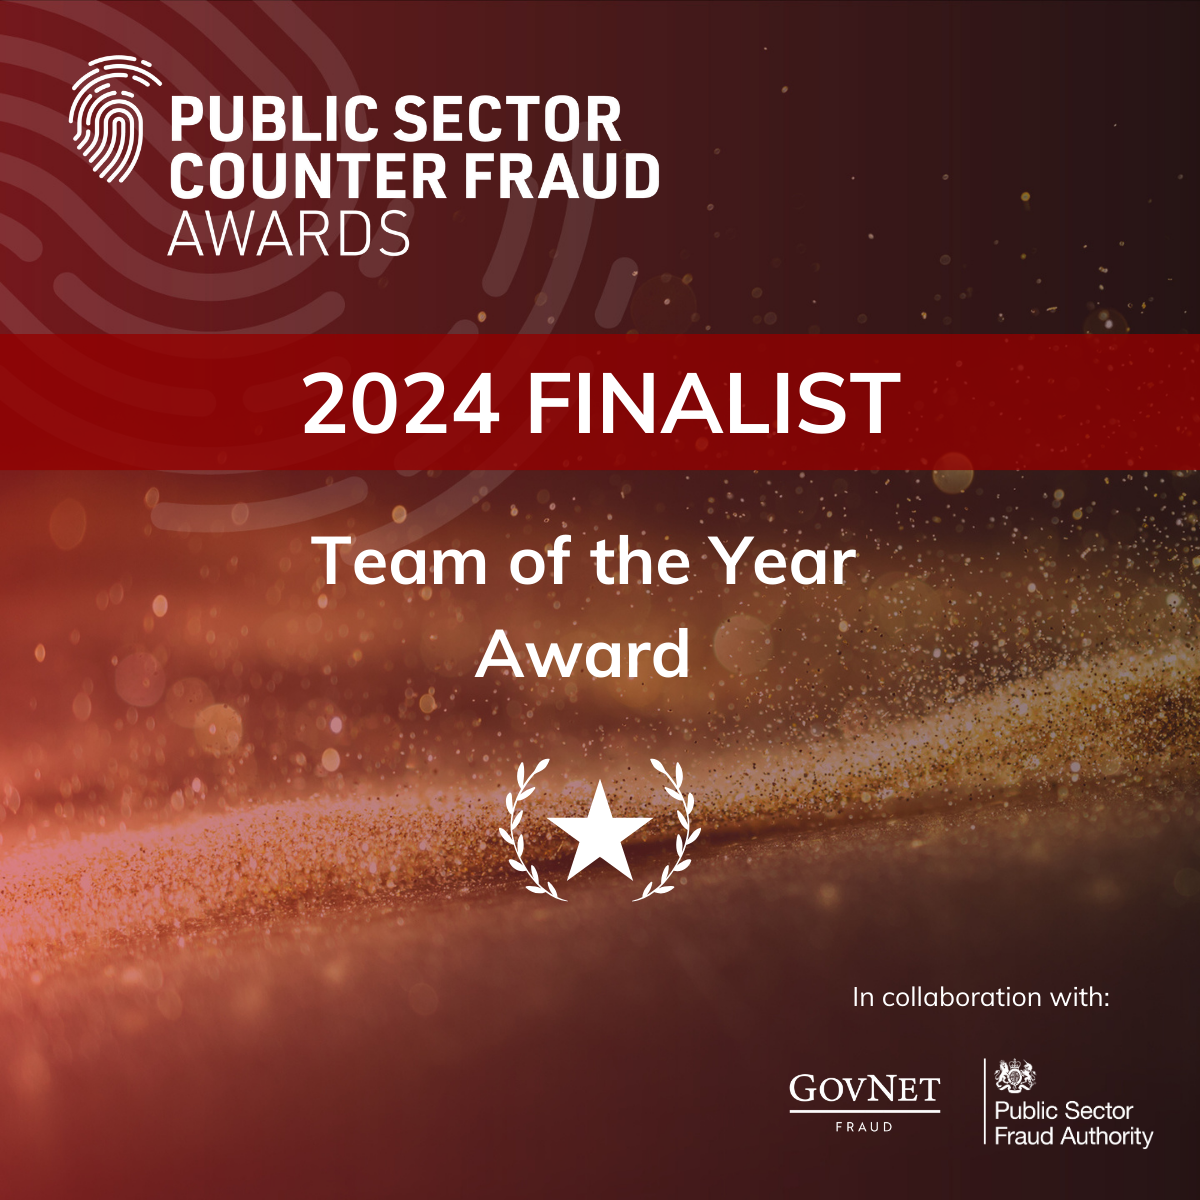 We are Public Sector Counter Fraud Award Finalists!